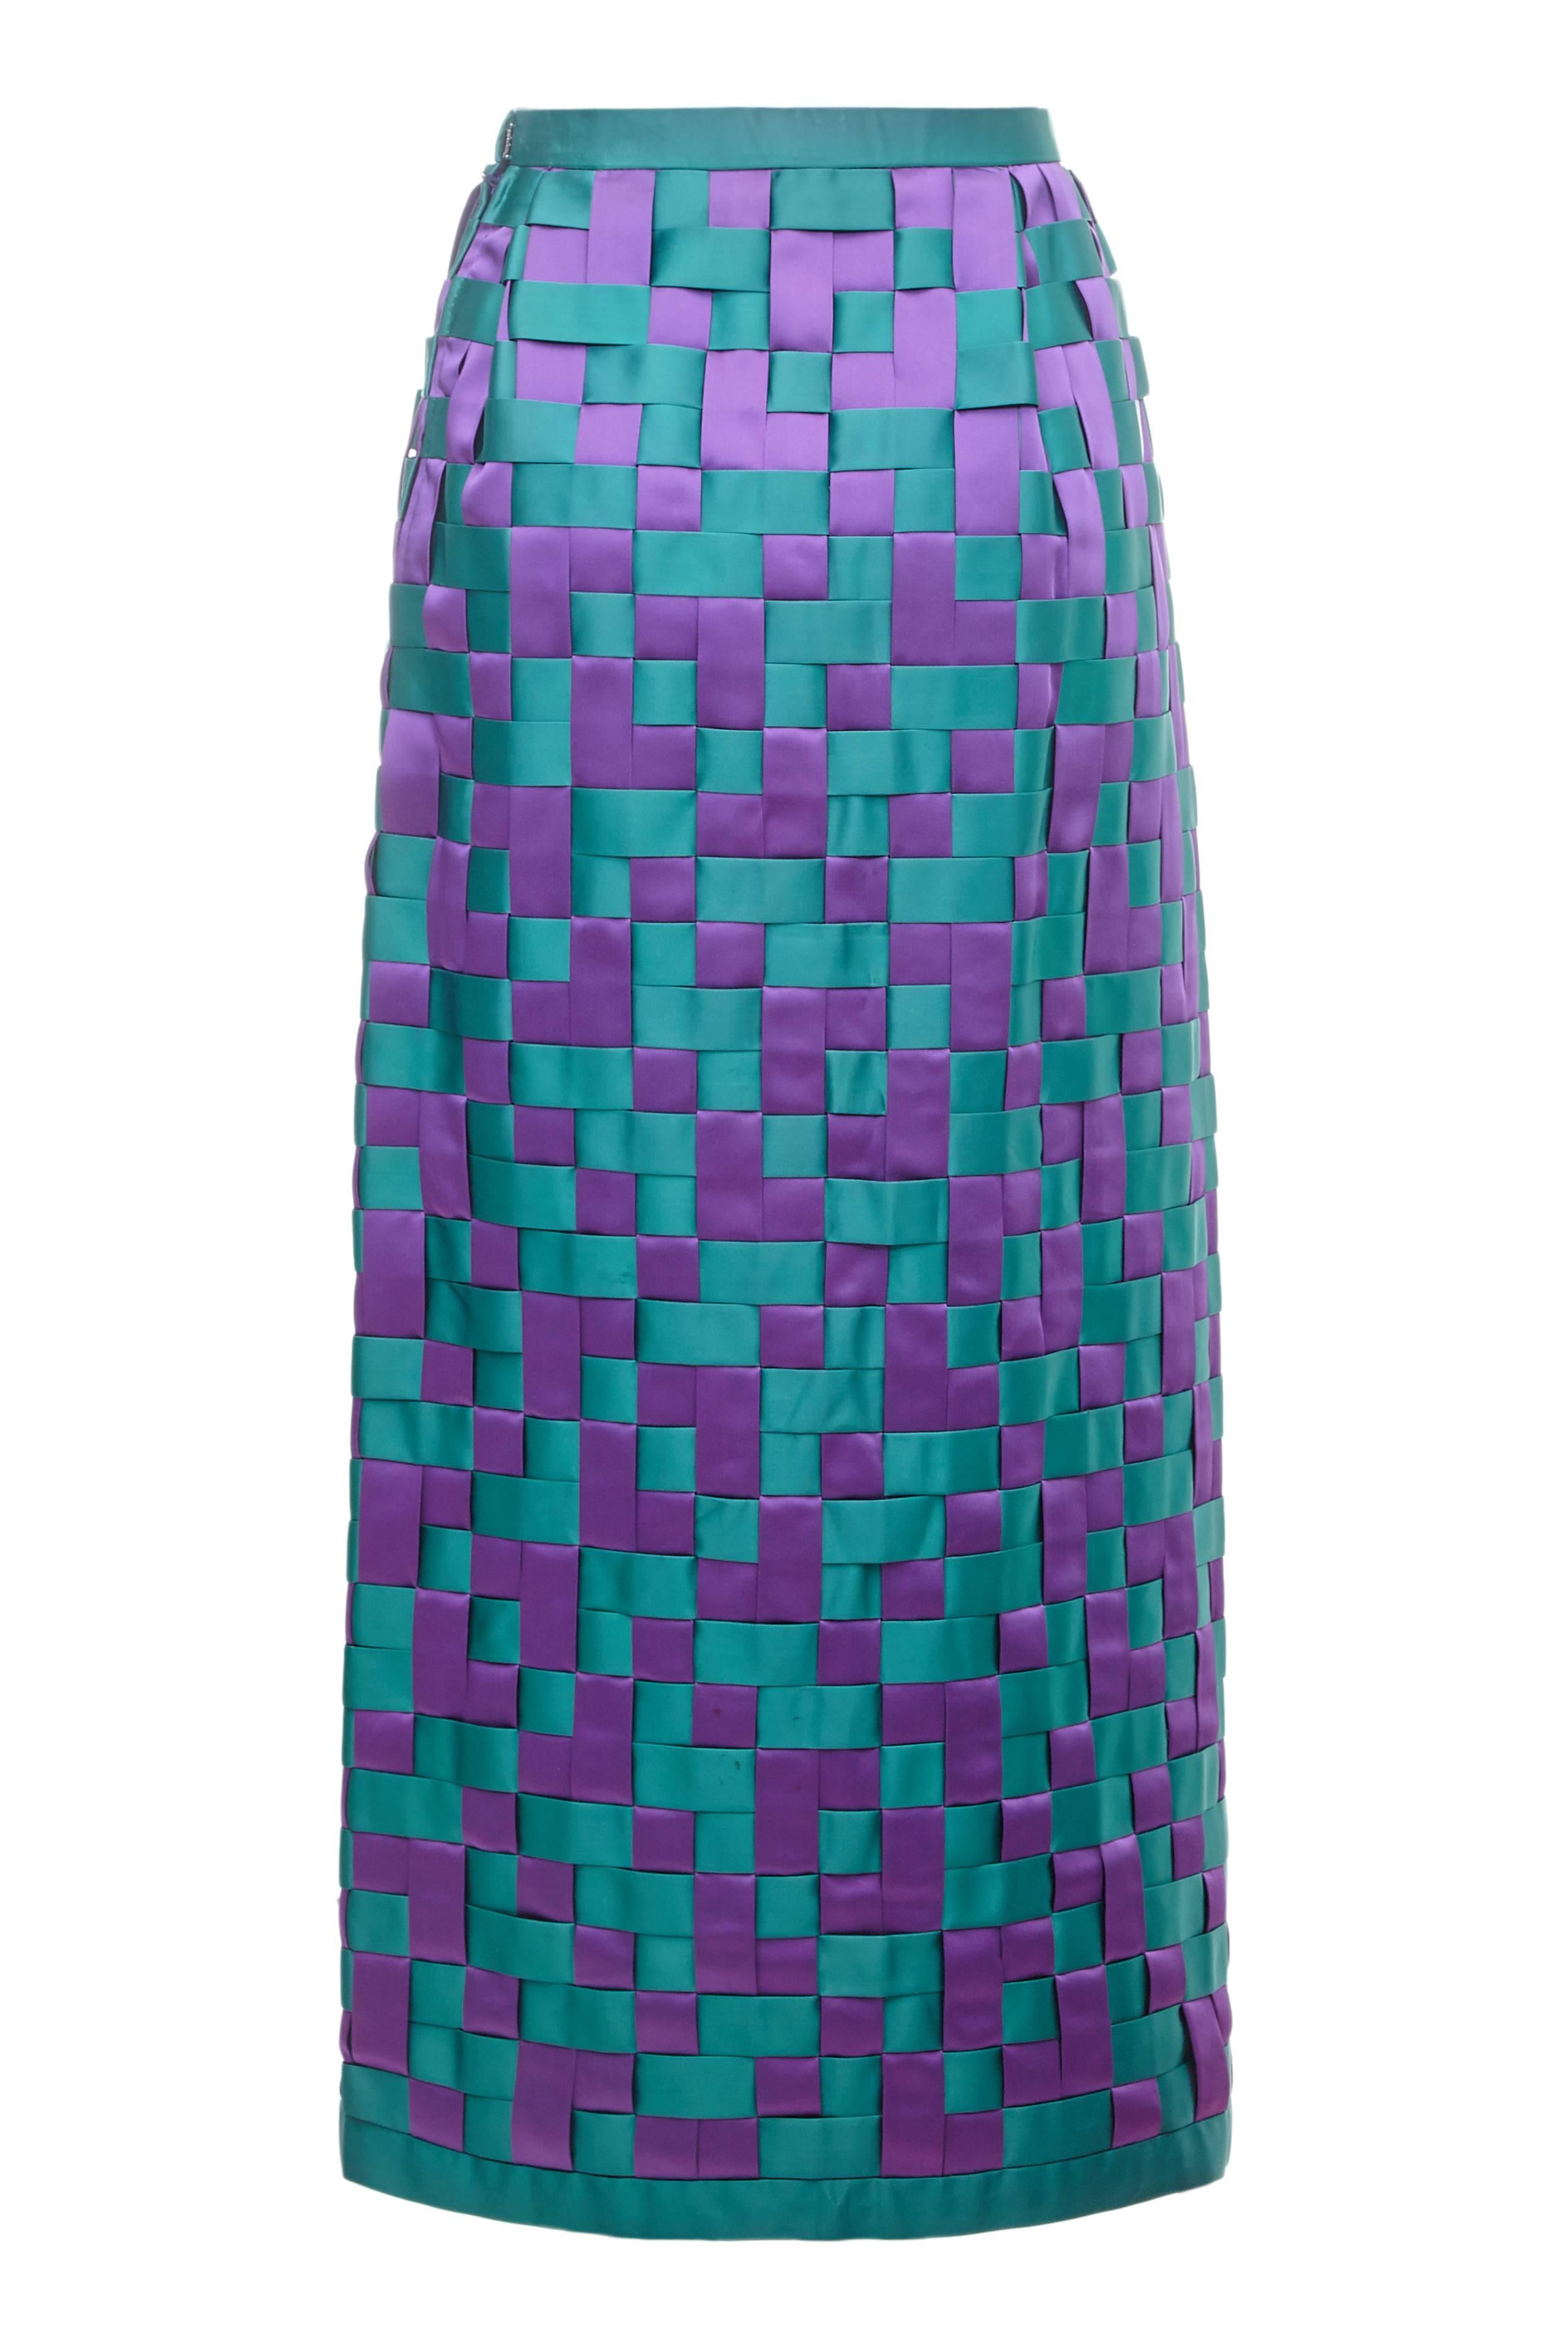 This exceptional 1960s hand woven satin couture skirt in purple and jade green is a fantastic statement piece in excellent vintage condition.  It fastens at the side with a zip, is fully lined in a green silk lining and is in excellent condition